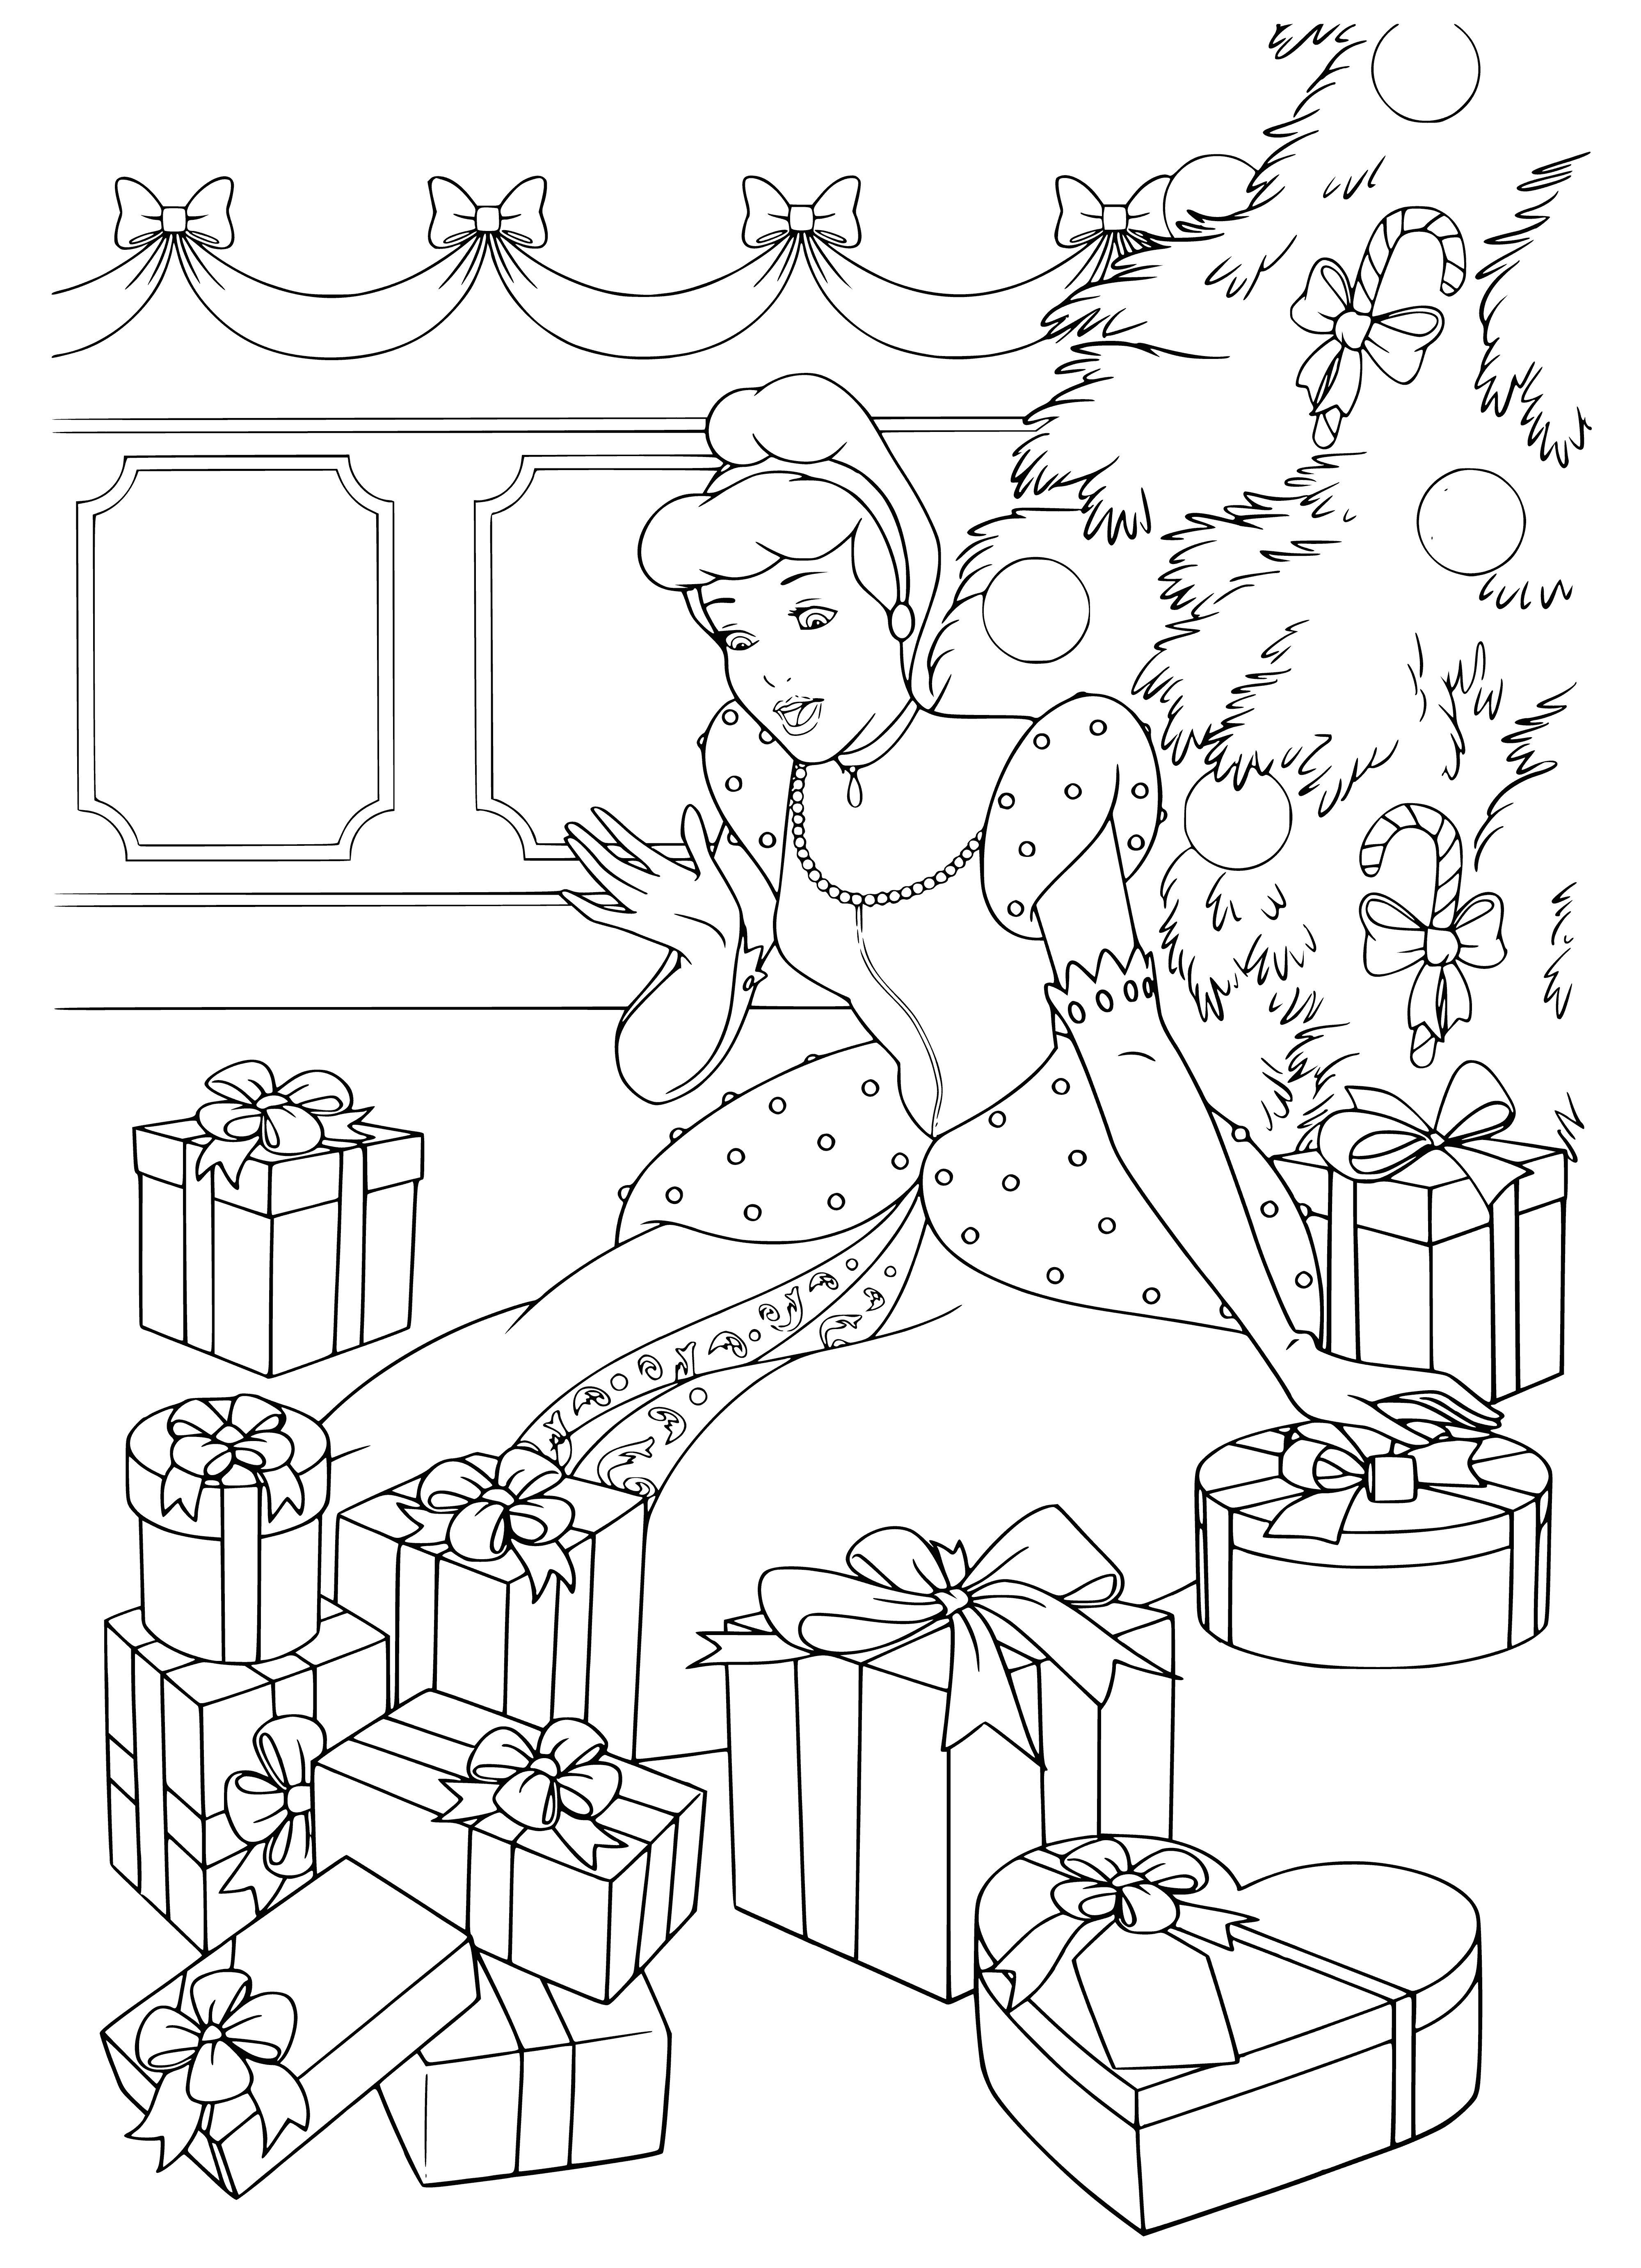 coloring page: Disney princesses Snow White, Cinderella, & Aurora celebrate New Year around tree filled with presents, bringing joy for the year ahead.